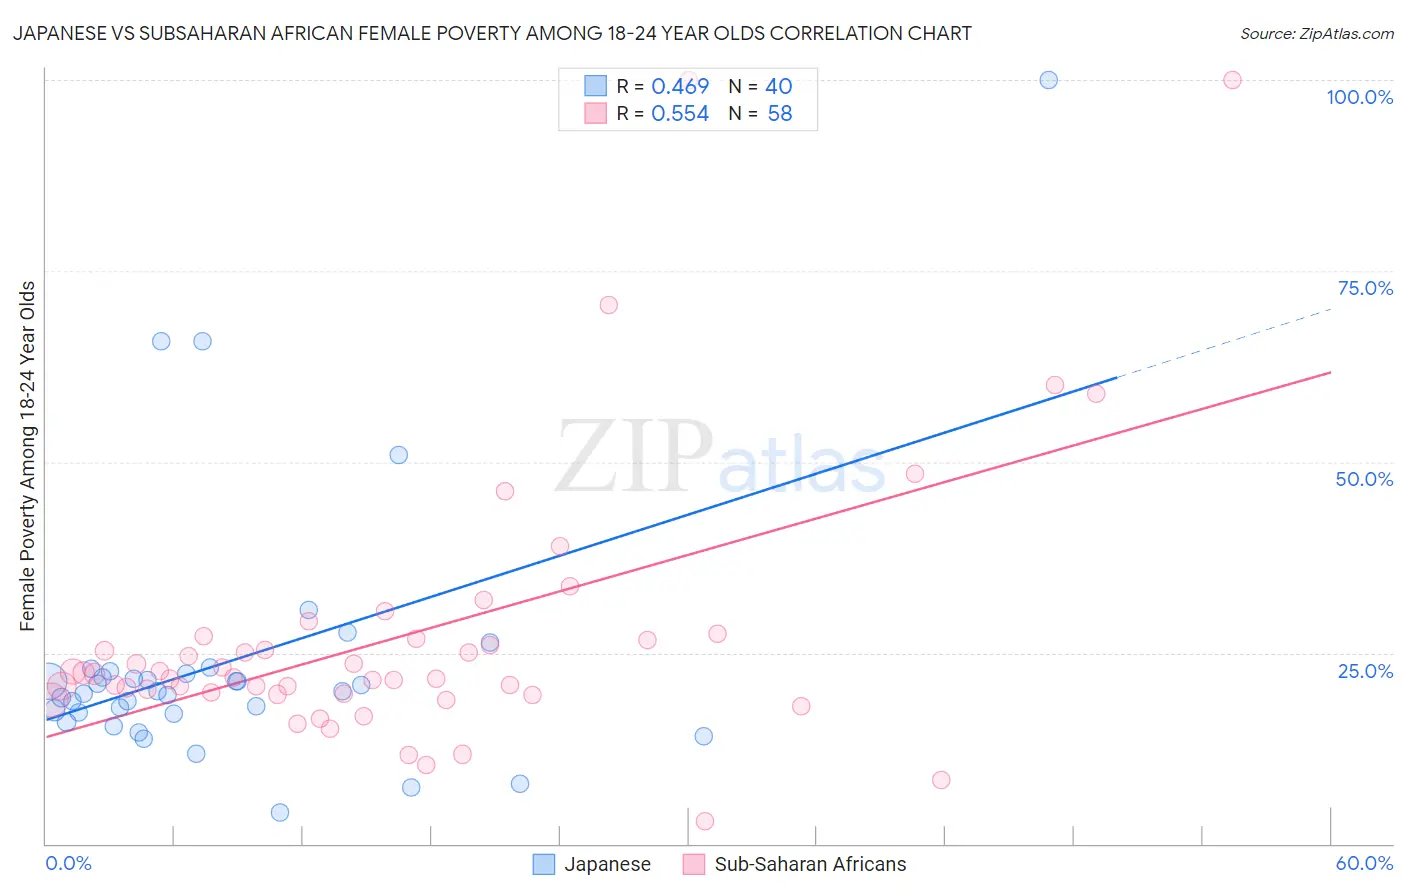 Japanese vs Subsaharan African Female Poverty Among 18-24 Year Olds